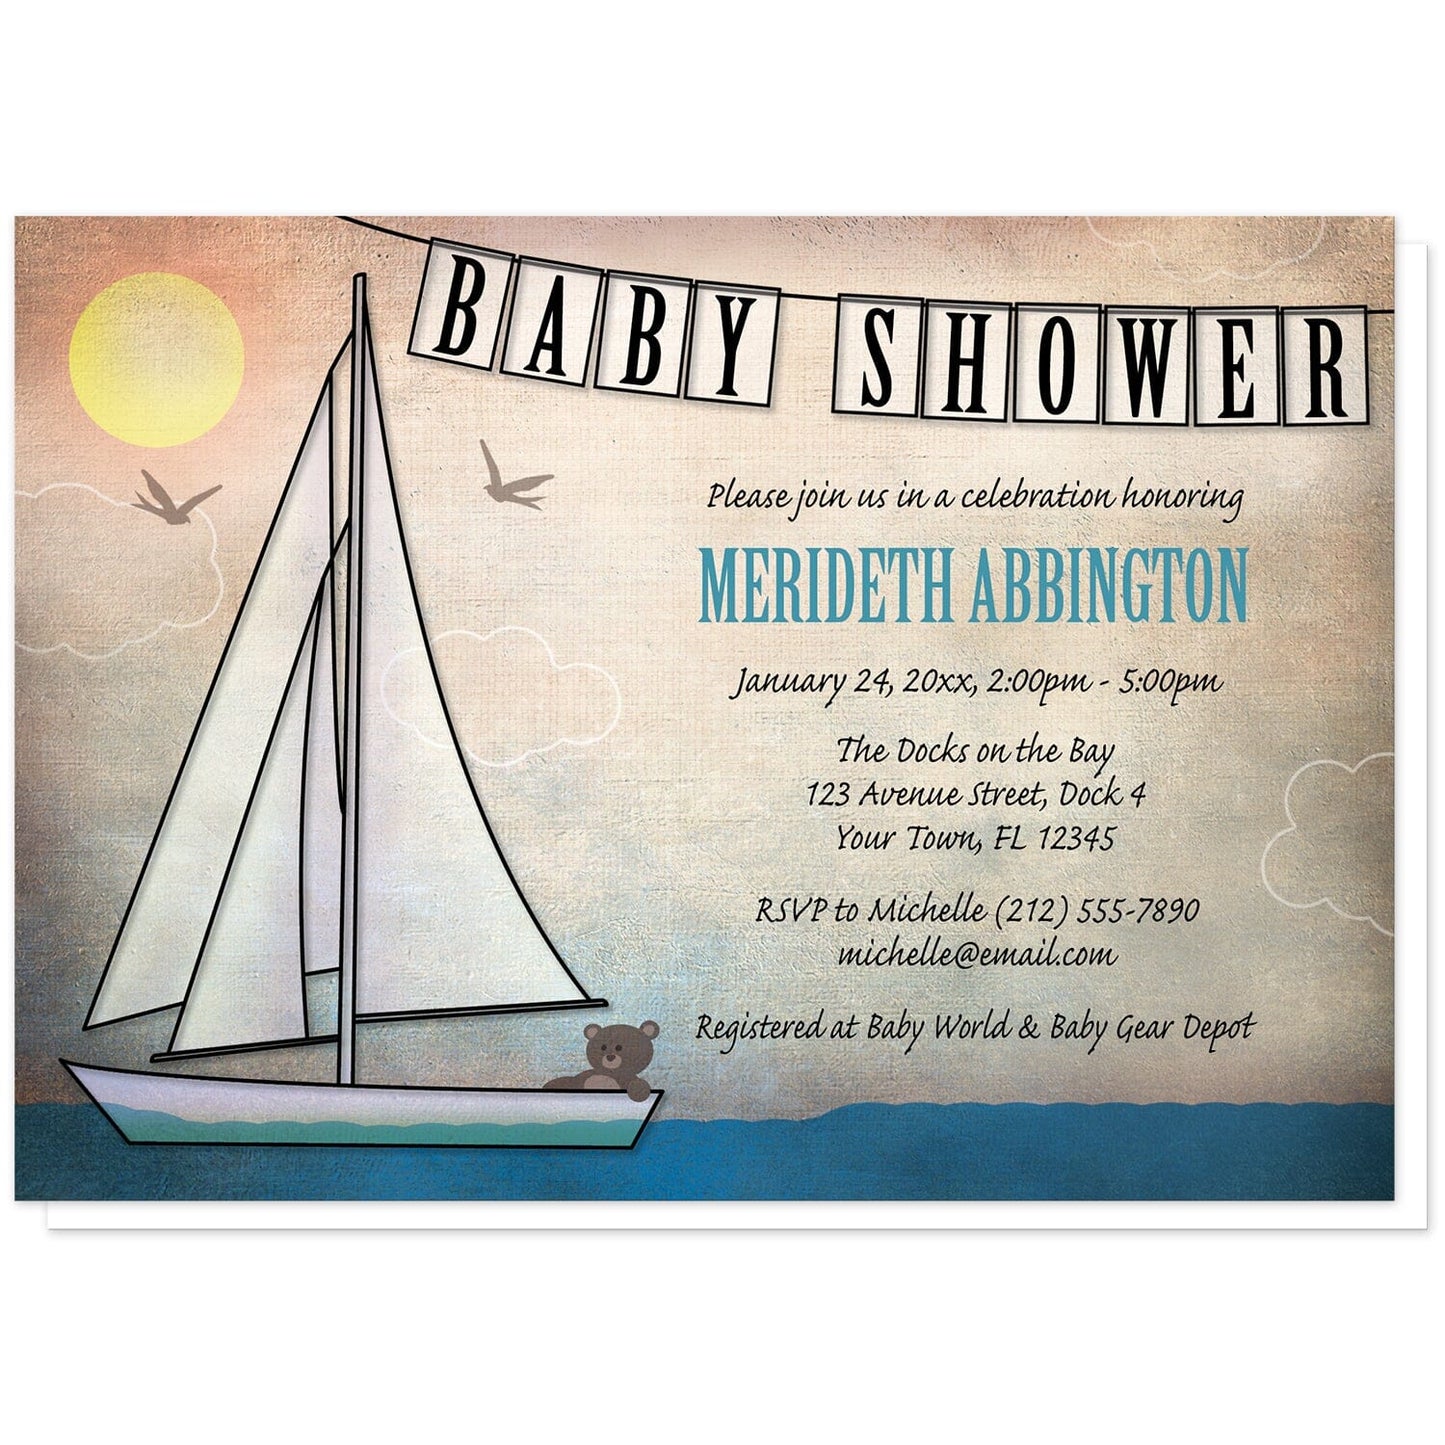 Rustic Nautical Sailboat Baby Shower Invitations at Artistically Invited. Rustic nautical sailboat baby shower invitations featuring an illustration of a sailboat on the water with a teddy bear passenger. A "BABY SHOWER" banner streams along the top above your personalized baby shower celebration details. The honoree's name is printed in a blue capital-letters only font while the rest of your shower details are printed in a black handwriting font over a rustic canvas background design.